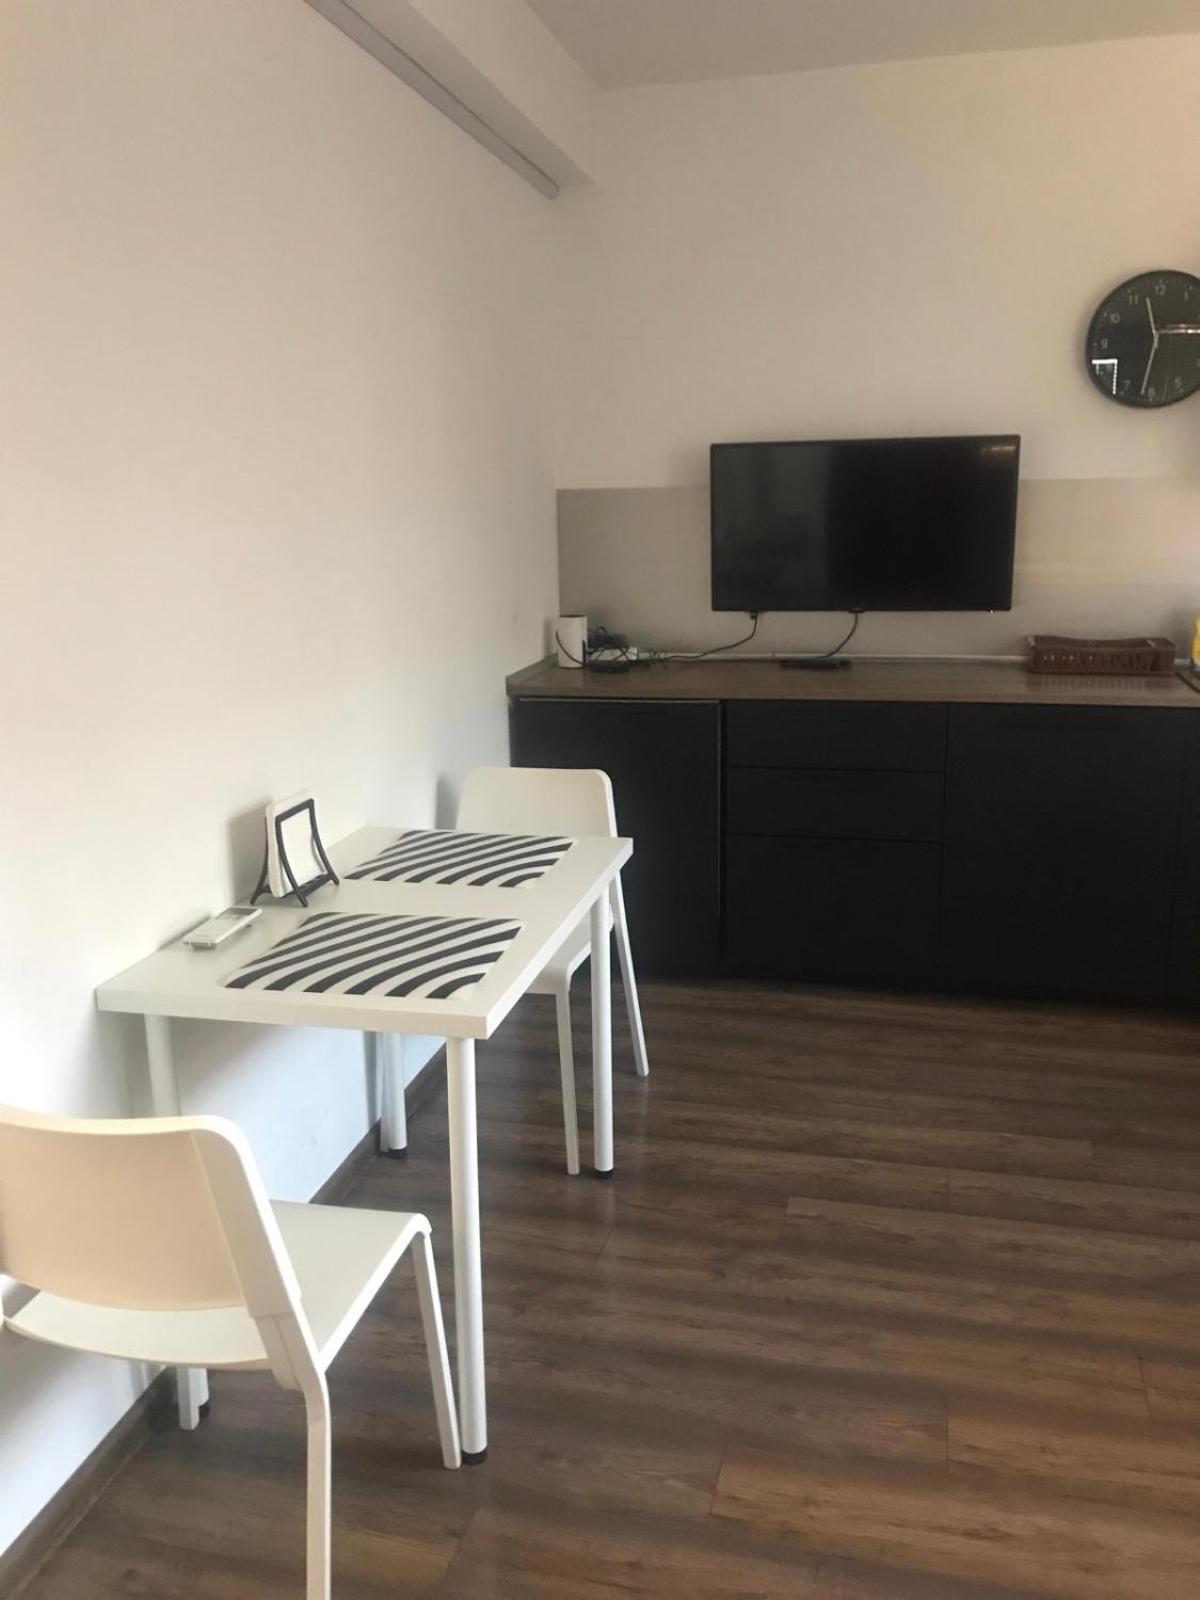 Self-Check Apartment Lilia 3 Next Ot 24 Hours Food And Drink Shop And Free Parking Area 索菲亞 外观 照片